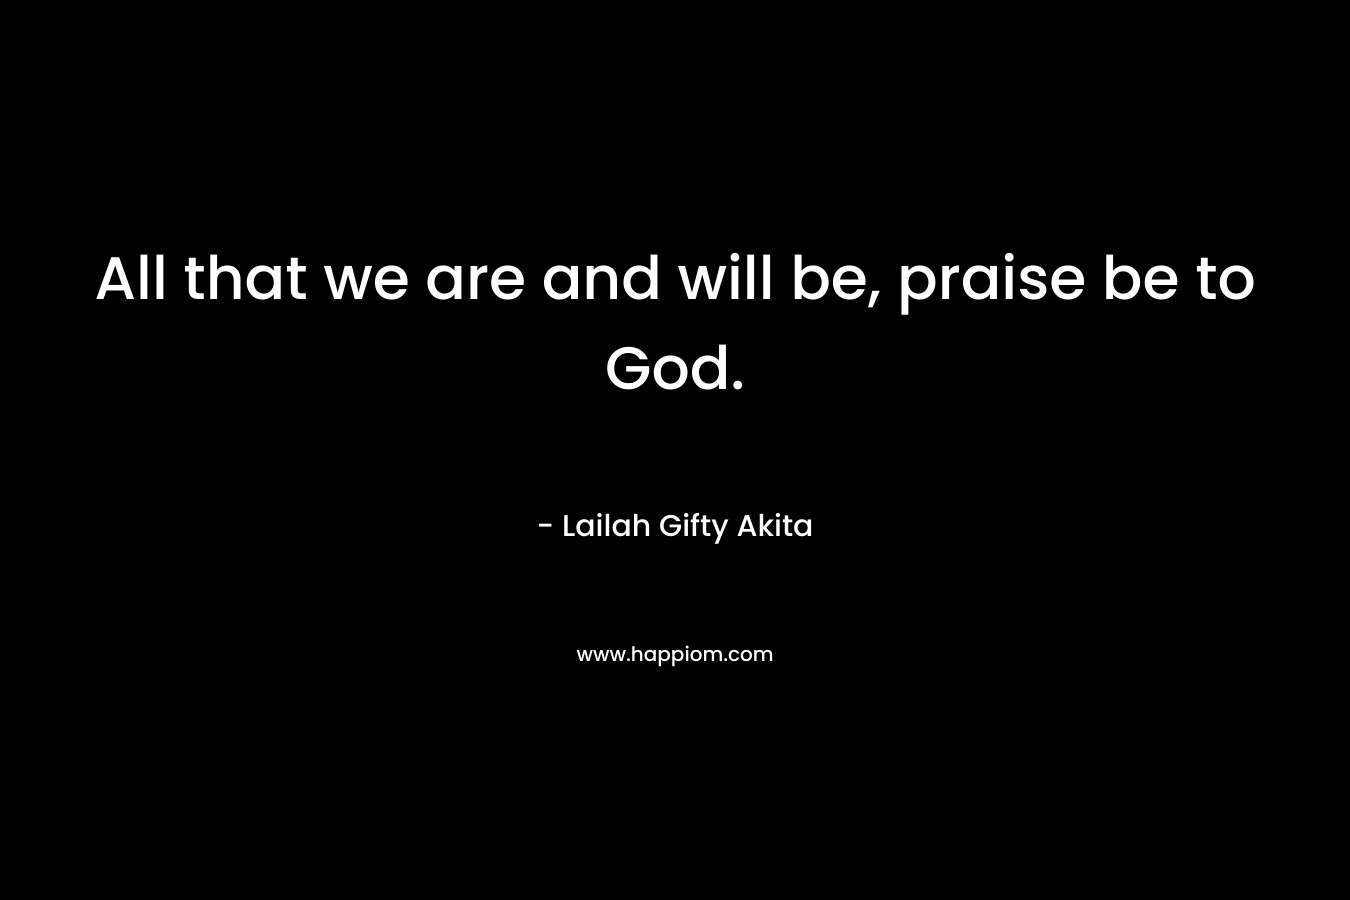 All that we are and will be, praise be to God.